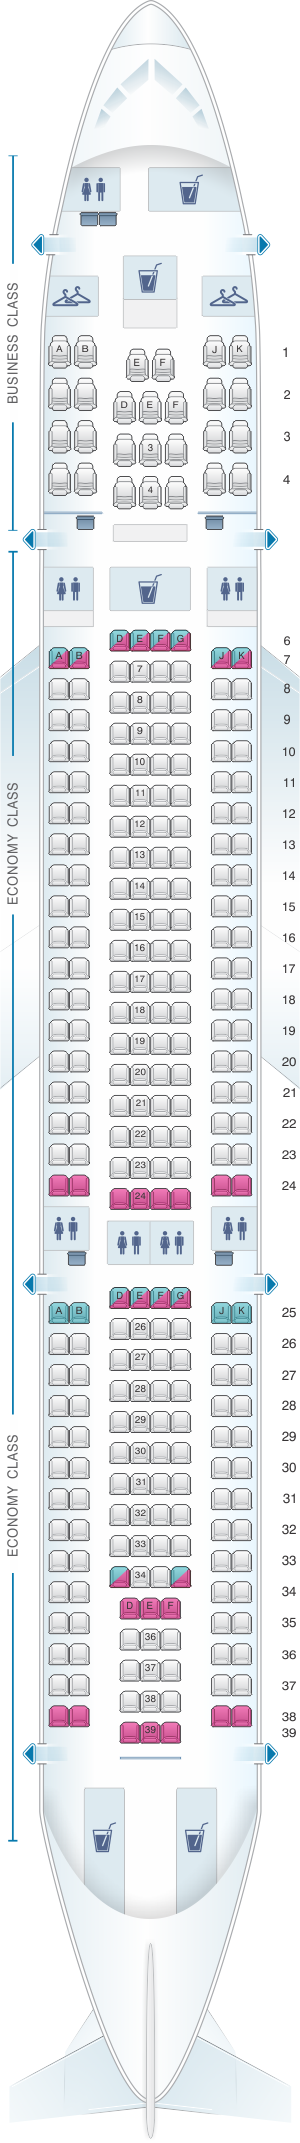 Seat map for Virgin Australia Airbus A330 200 Config. 2